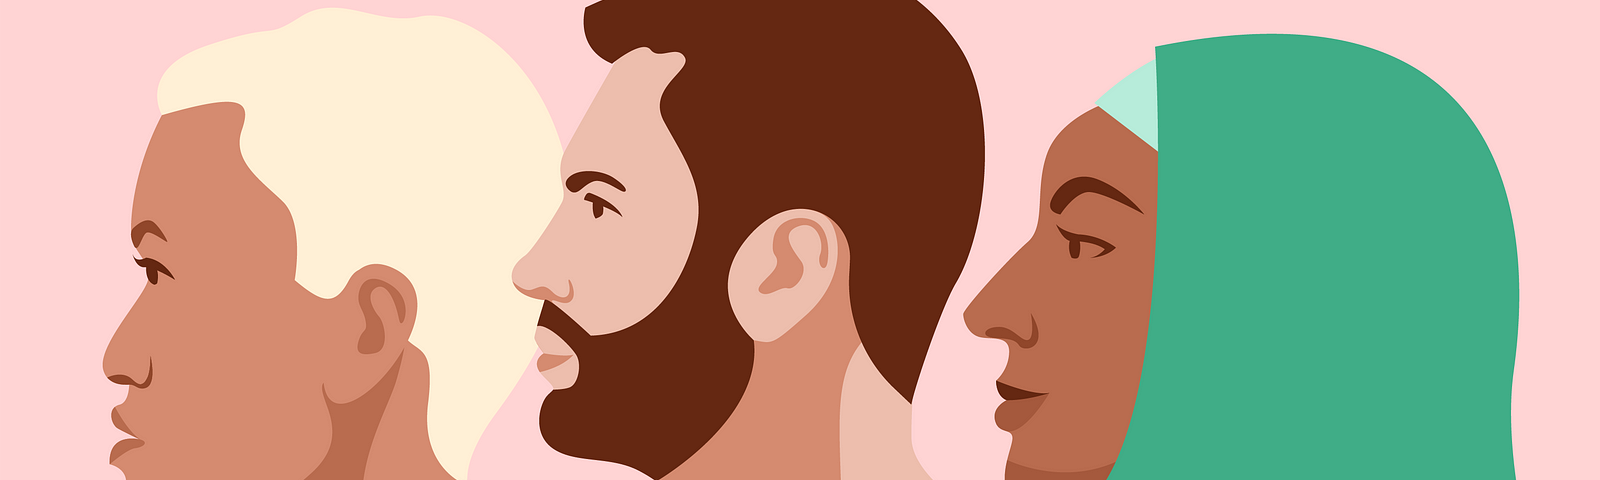 An illustration of three people in profile view. From left to right, there’s a medium-skinned person with short white hair, a light-skinned person with dark brown hair and a beard, and a dark-skinned person wearing a green hijab.